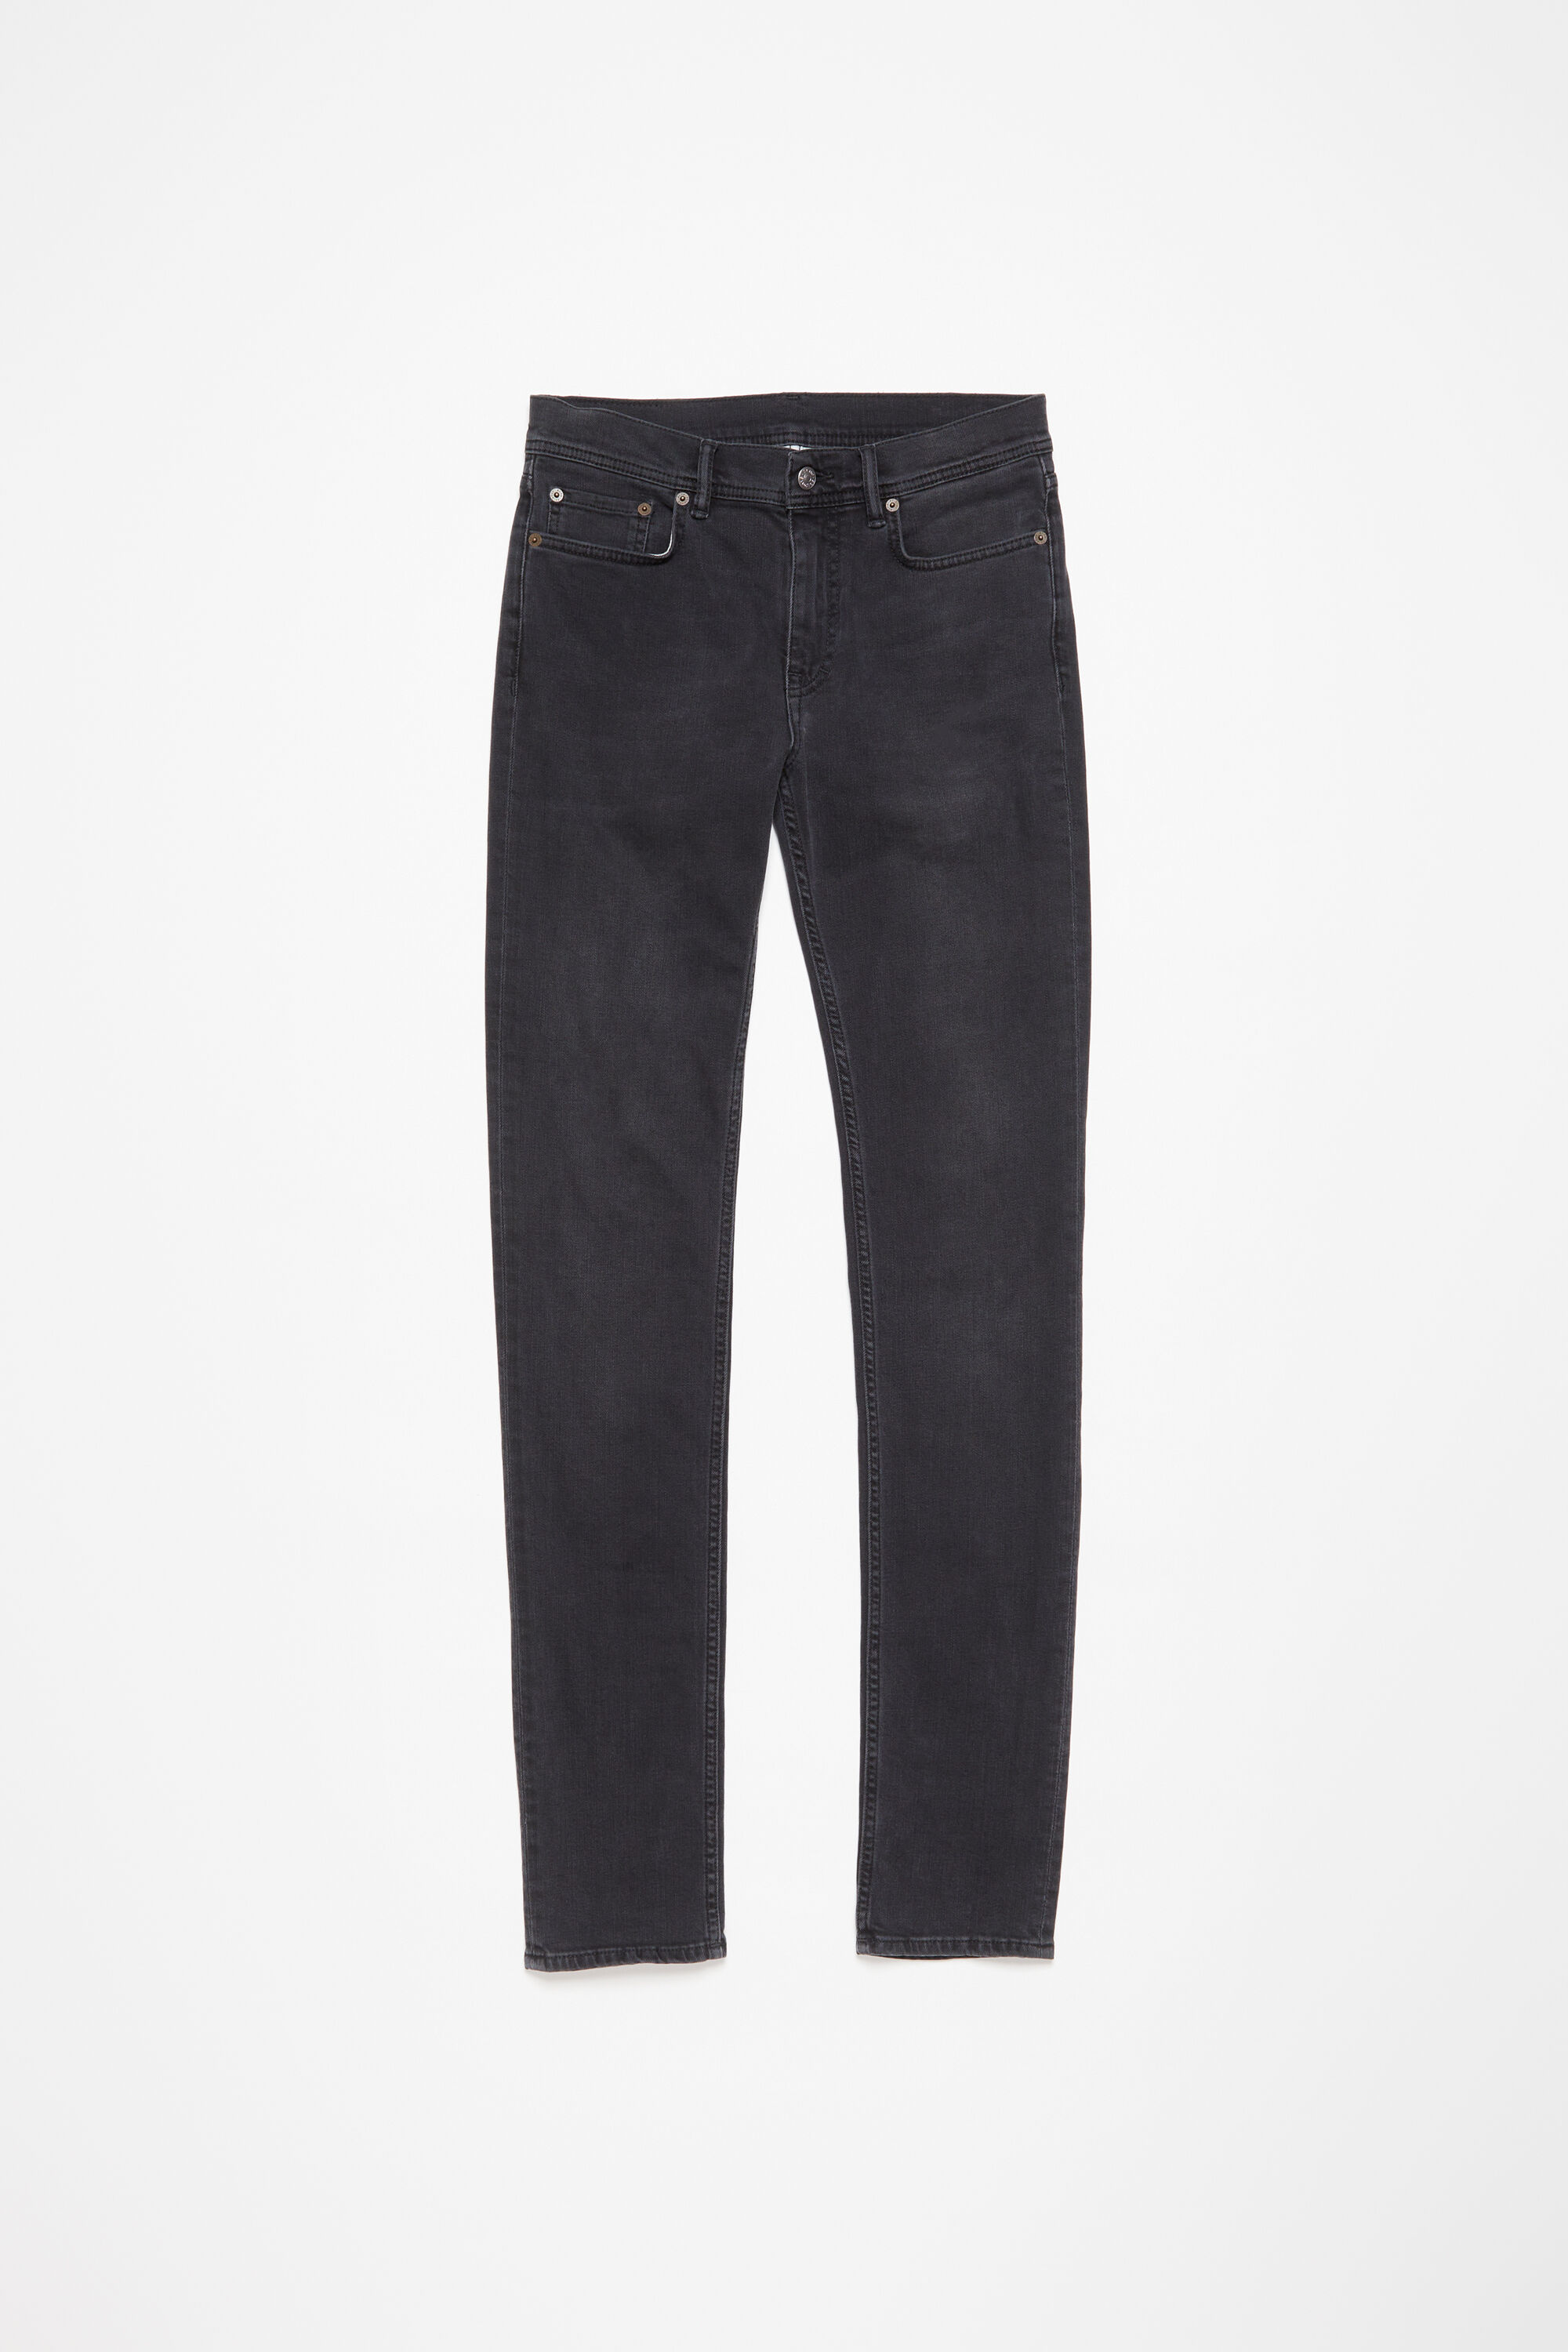 Acne Studios - Skinny fit jeans - North - Mid Blue